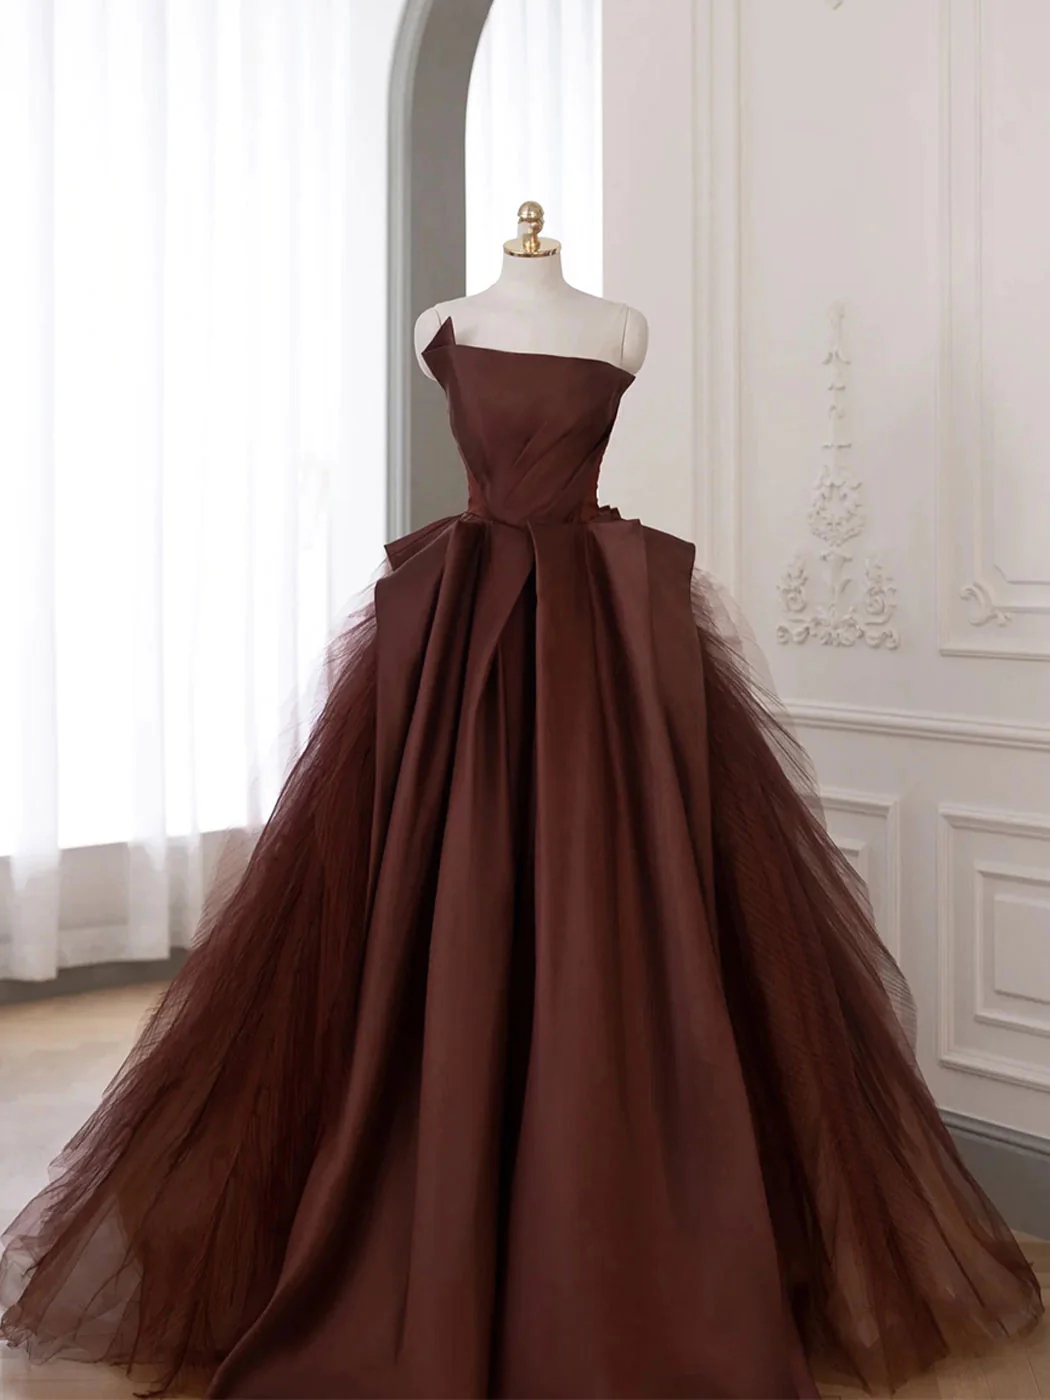 Elegant Chocolate Tulle Ball Gown With Asymmetric Bodice